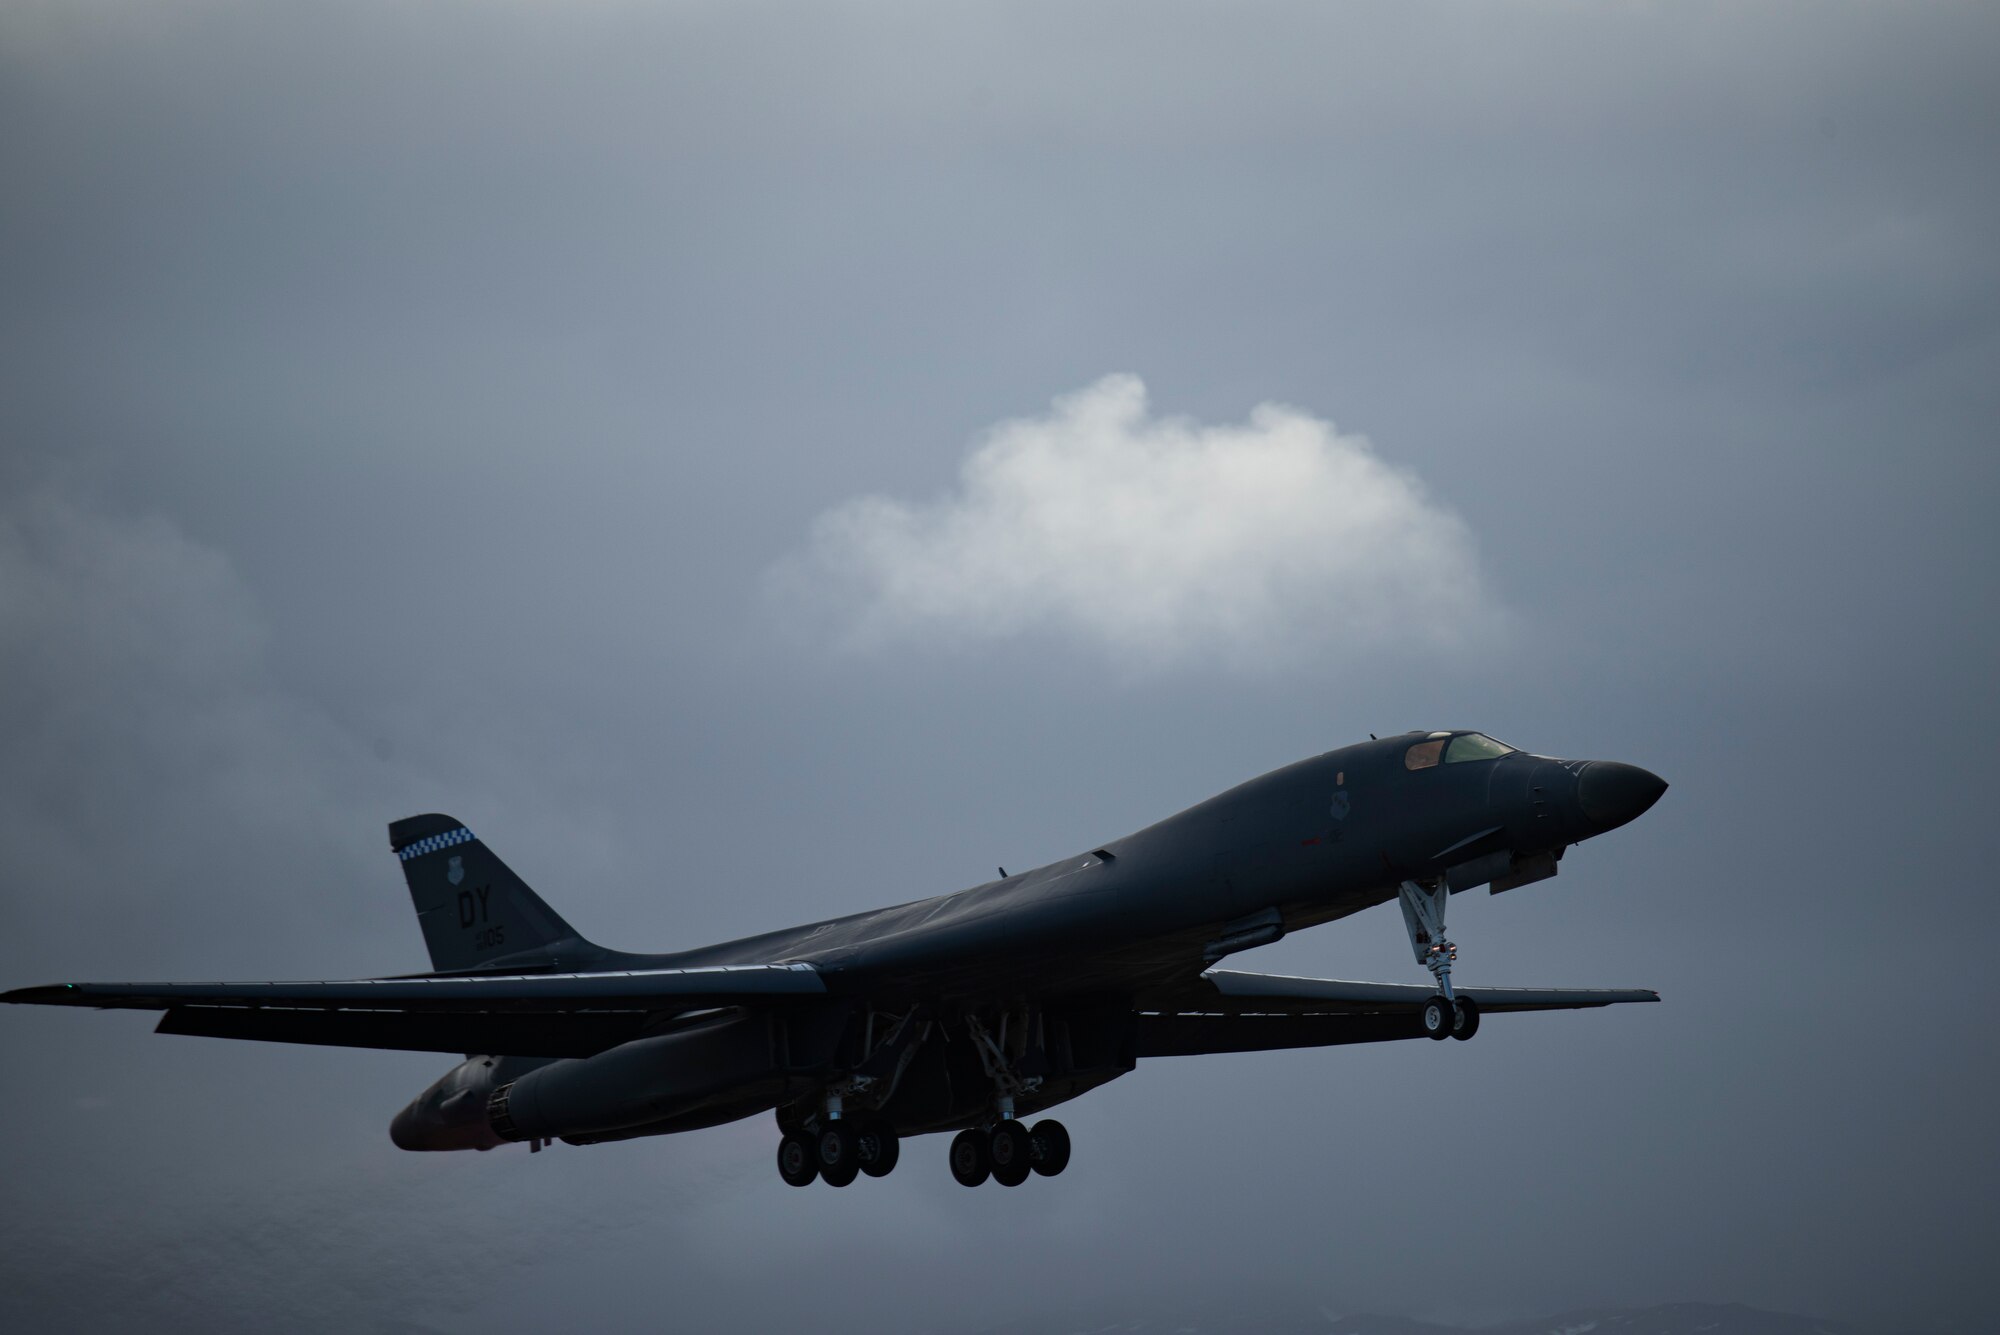 A B-1B Lancer assigned to the 9th Expeditionary Bomb Squadron takes off from Ørland Air Force Station, Norway, Feb. 26, 2021. The B-1 aircrew participated in exercise Arctic Bone, a local training sortie where they integrated with a U.S Navy P-8 Poseidon, a Royal Norwegian air force F-35 Lightning, and a Royal Norwegian navy Skjold-class Corvette ship as part of a Bomber Task Force Europe mission. (U.S. Air Force photo by Airman 1st Class Colin Hollowell)